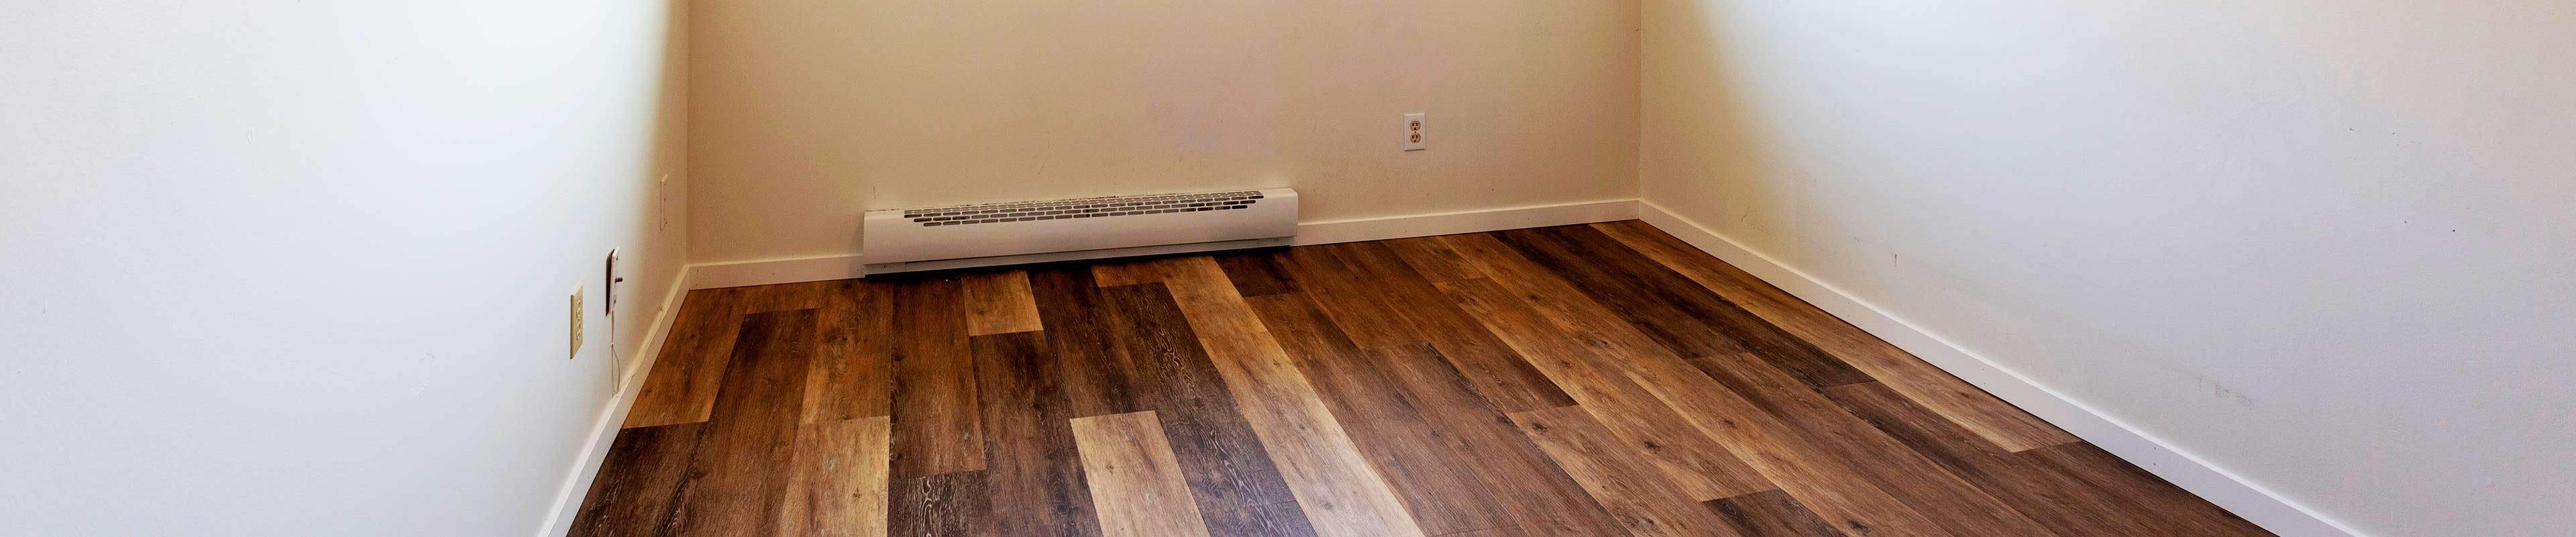 Photo of an electric baseboard heater.